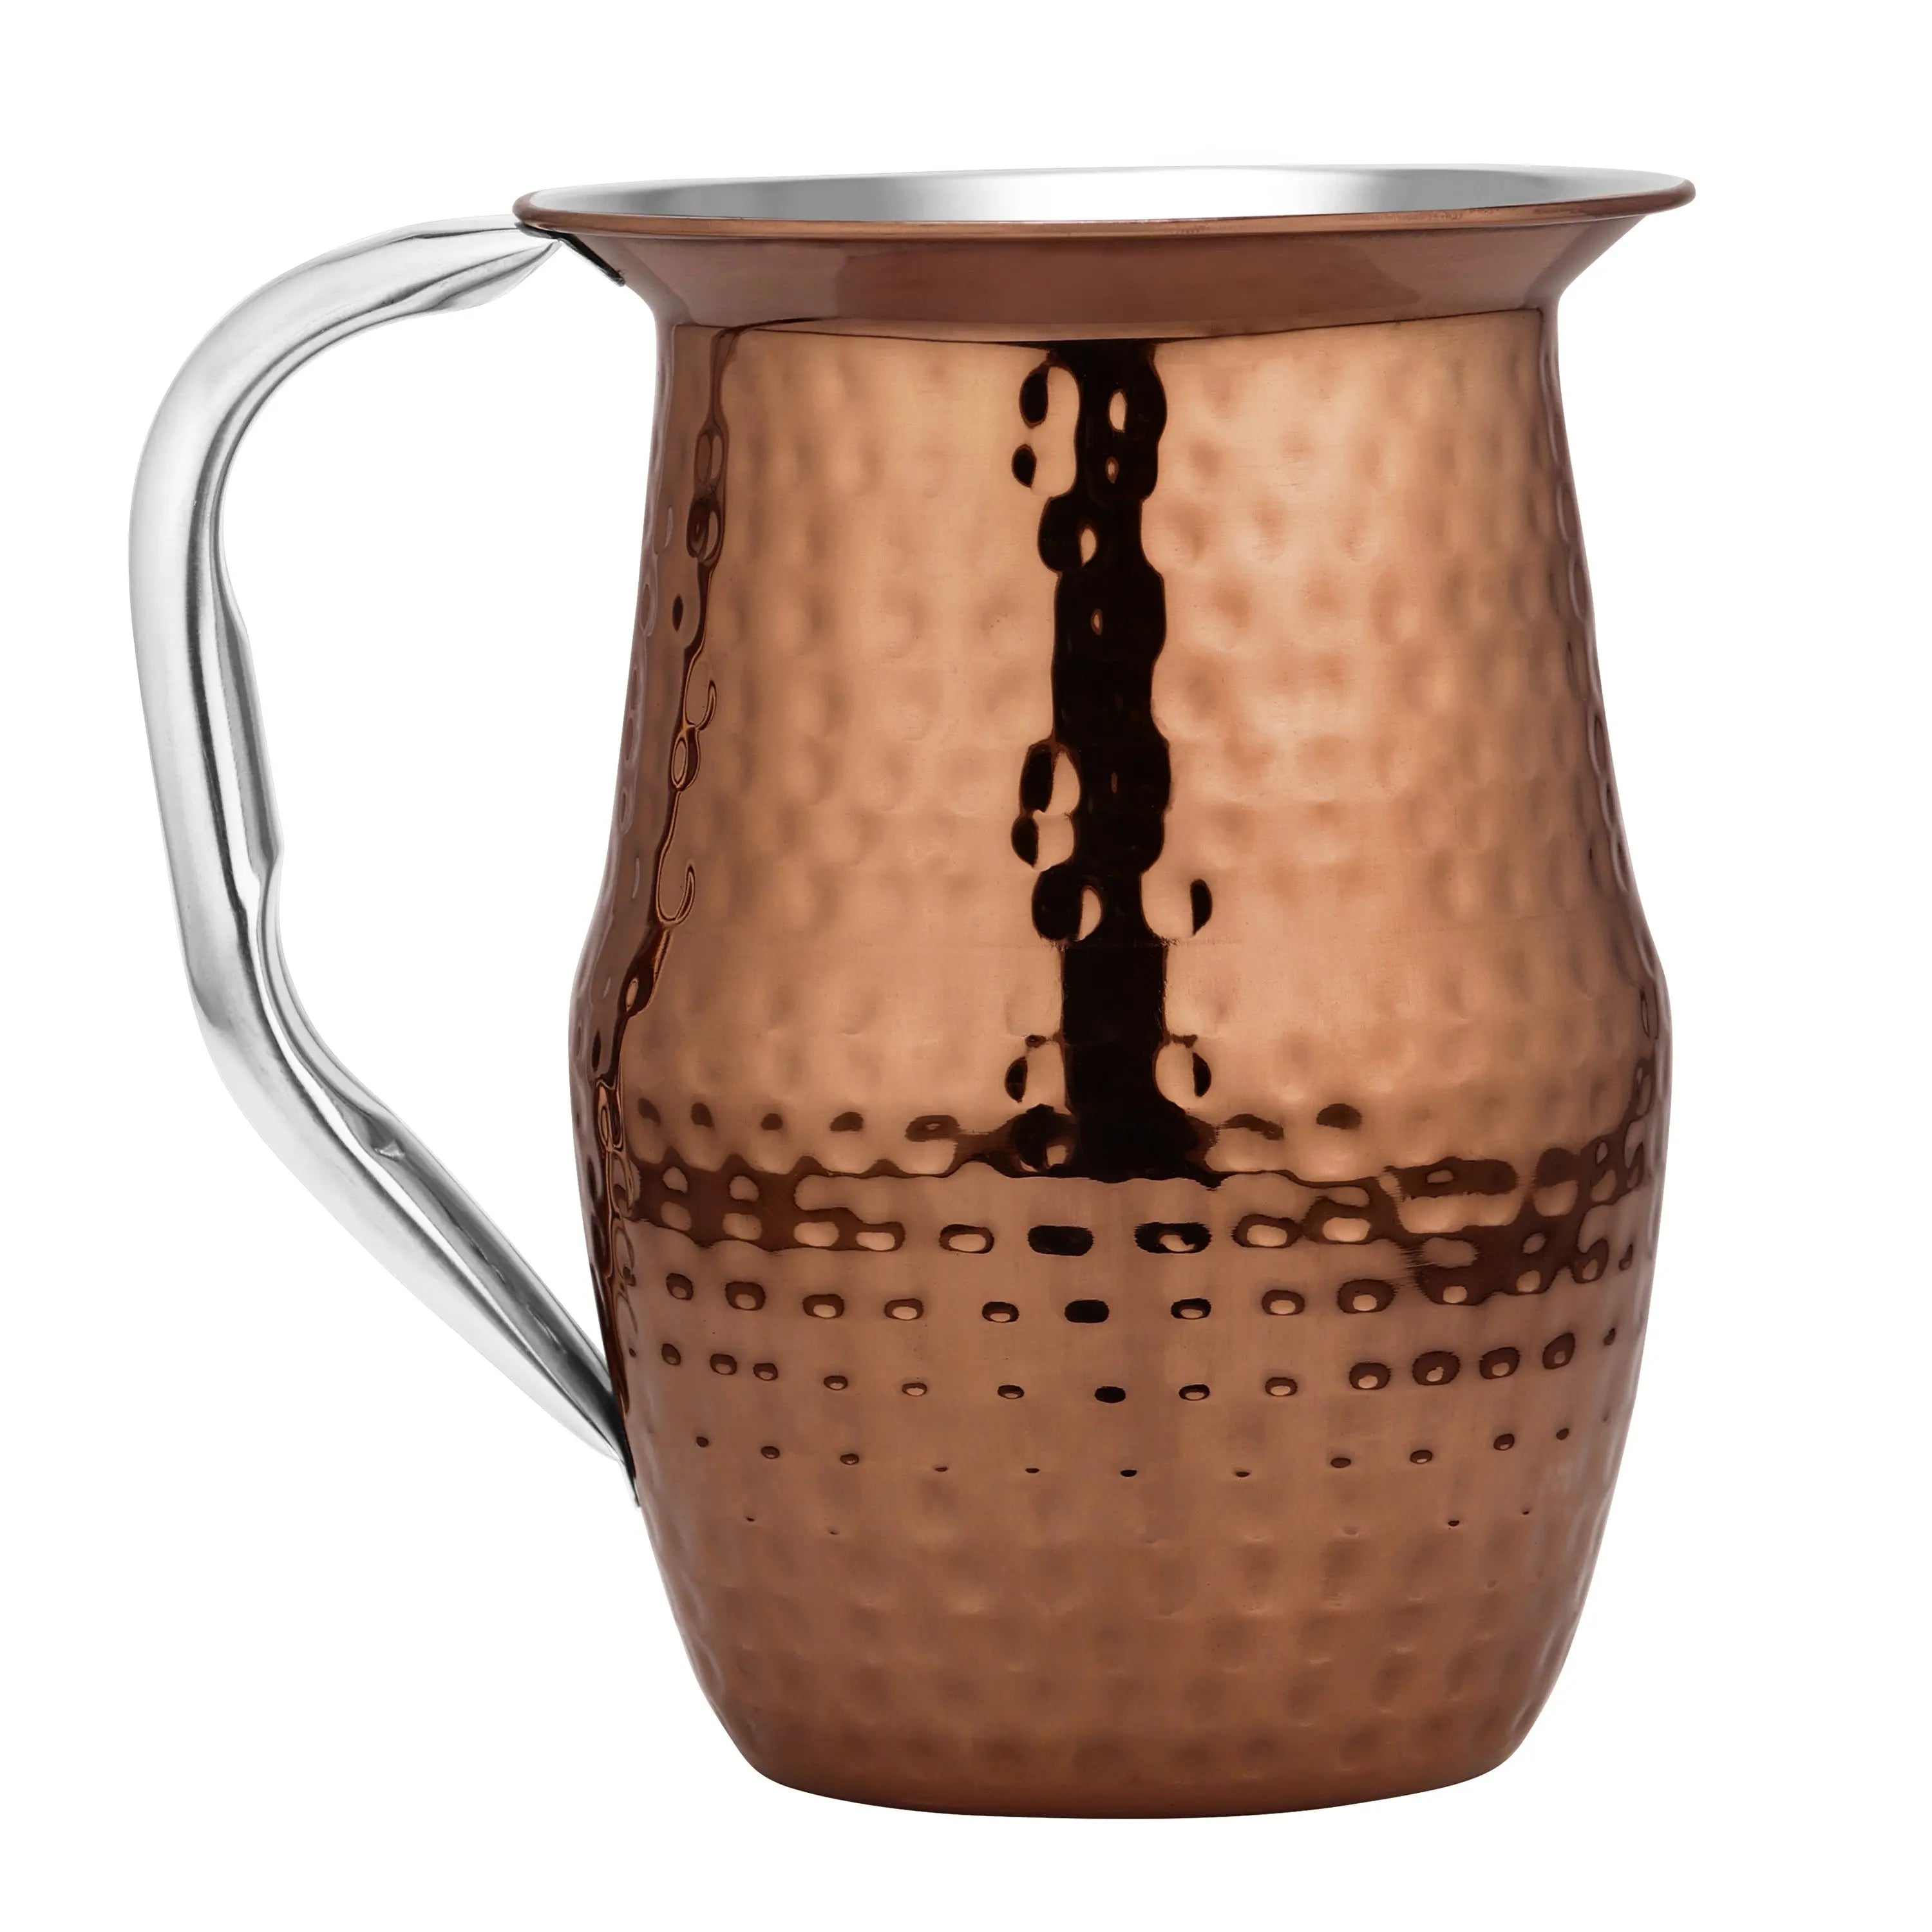 STAINLESS STEEL COPPER PVD PEPSI DELUXE JUG - CROCKERY WALA AND COMPANY 